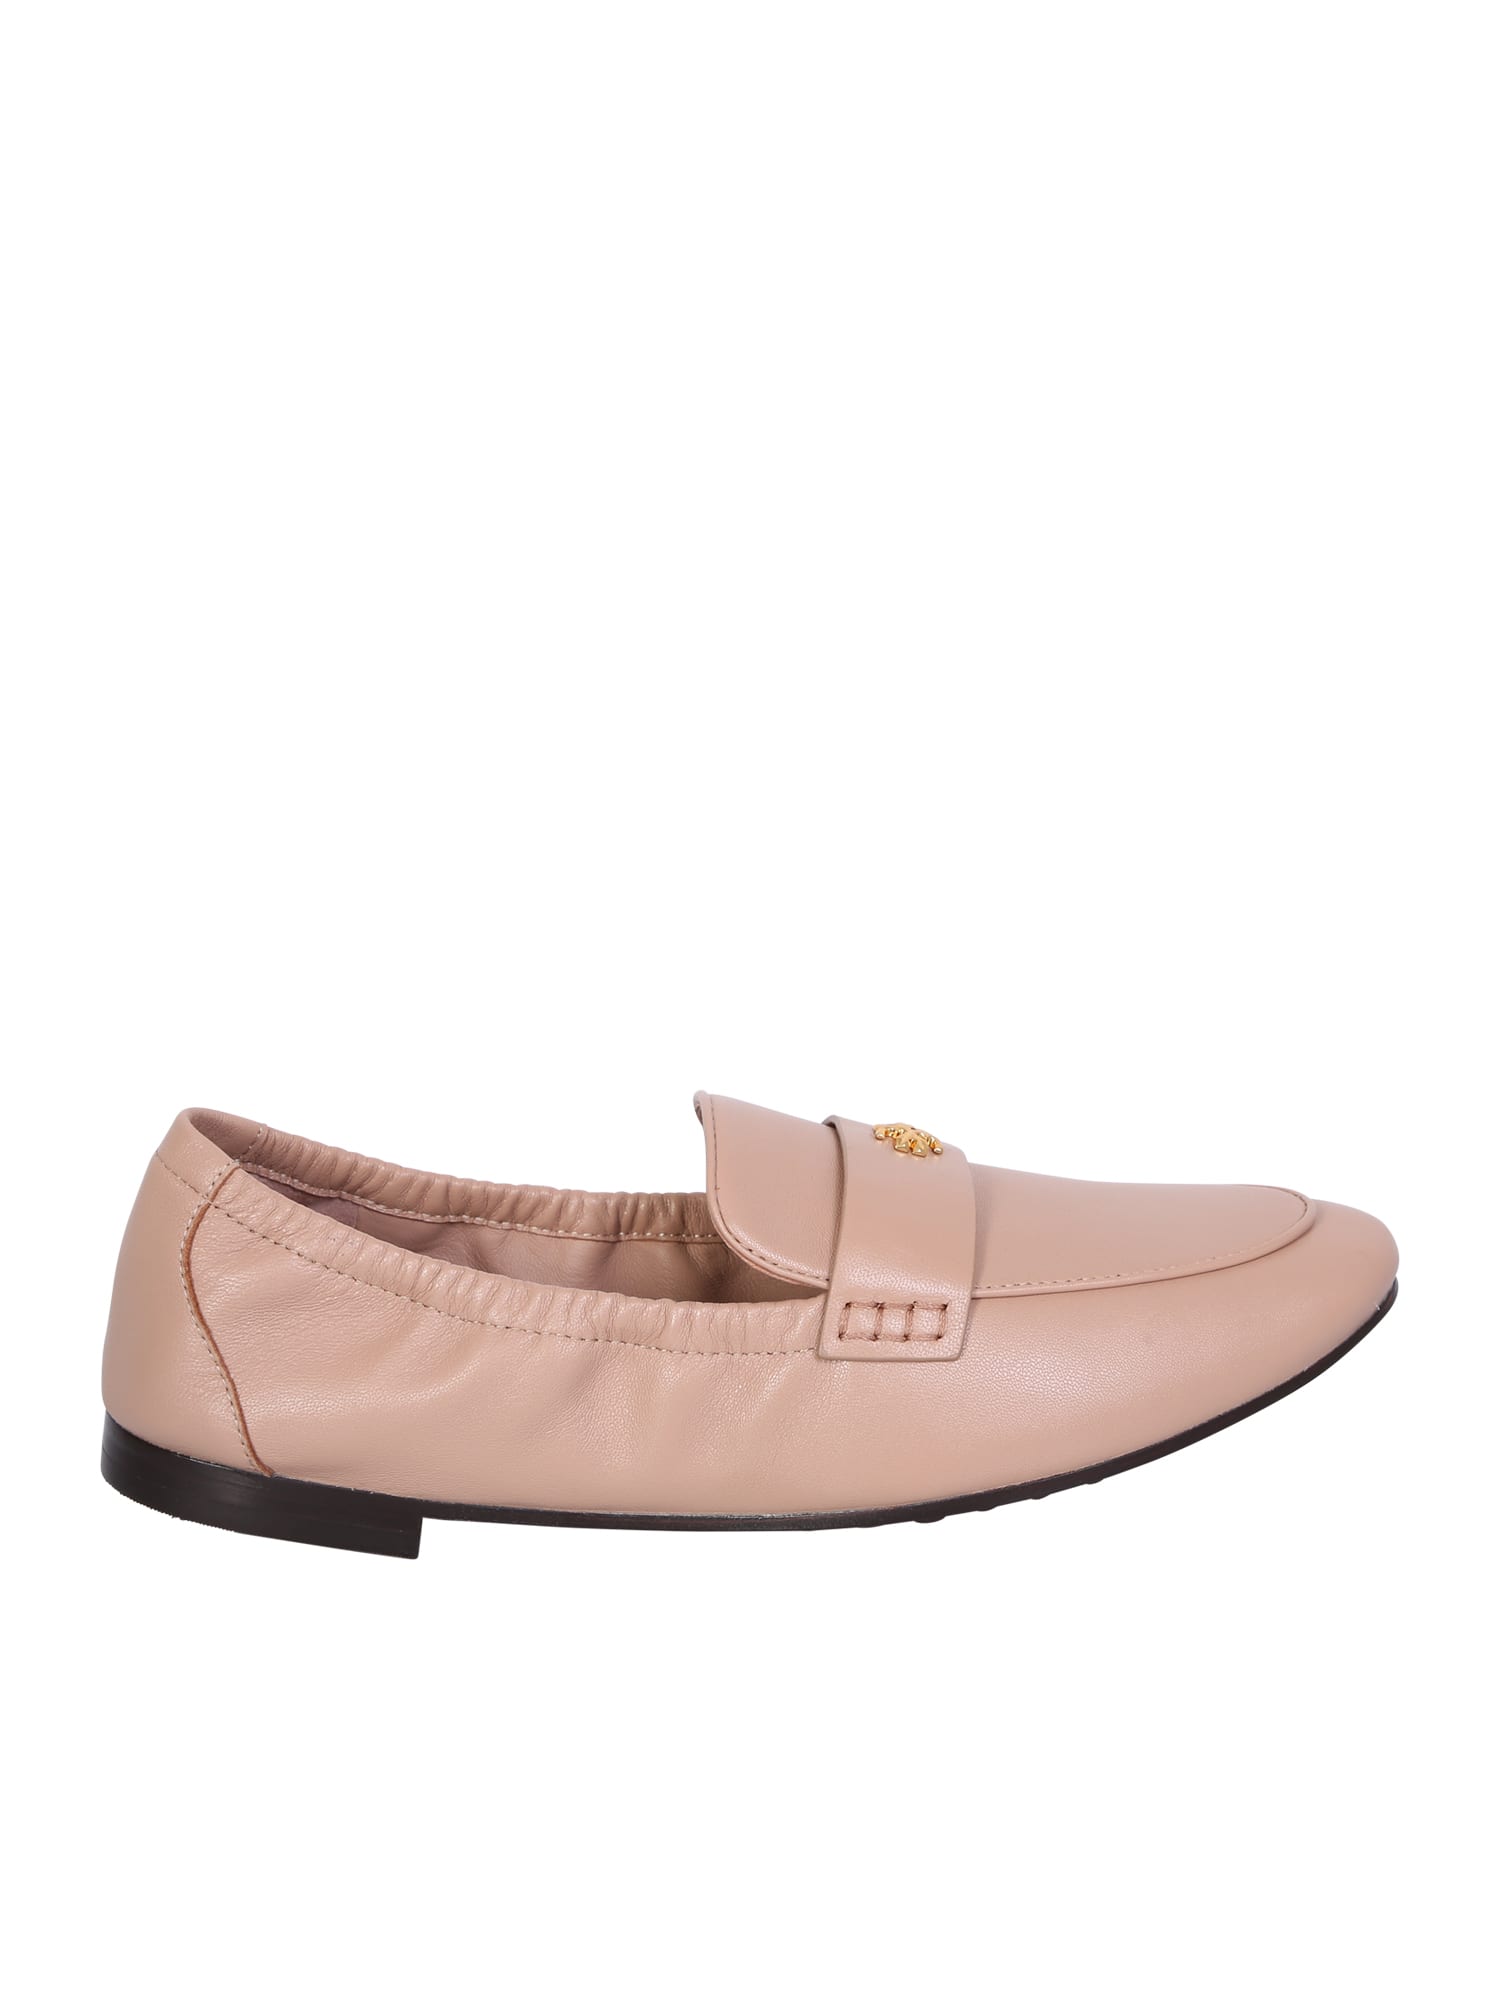 TORY BURCH BALLET LEATHER LOAFER